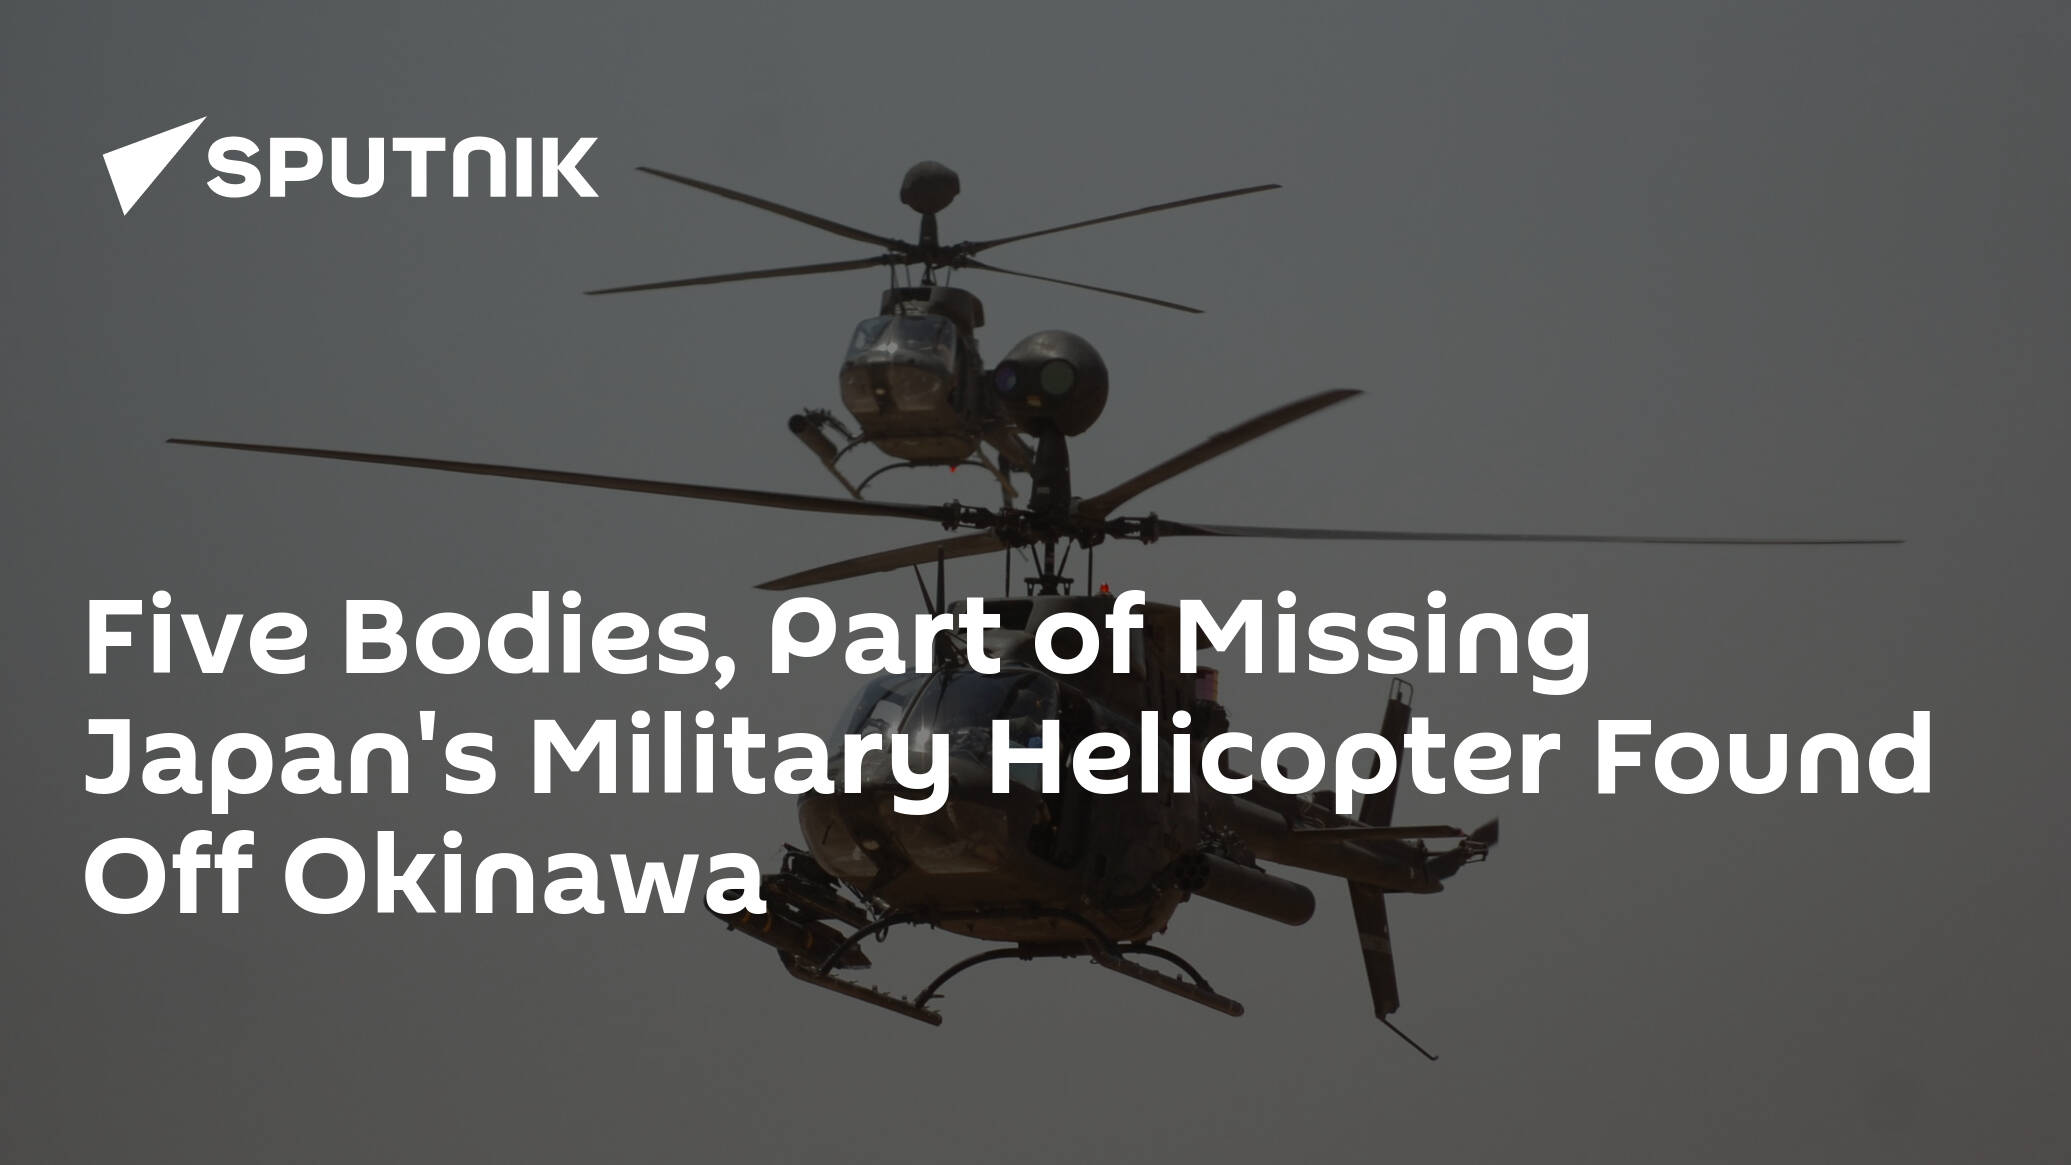 Five Bodies, Part of Missing Japan's Military Helicopter Found Off Okinawa